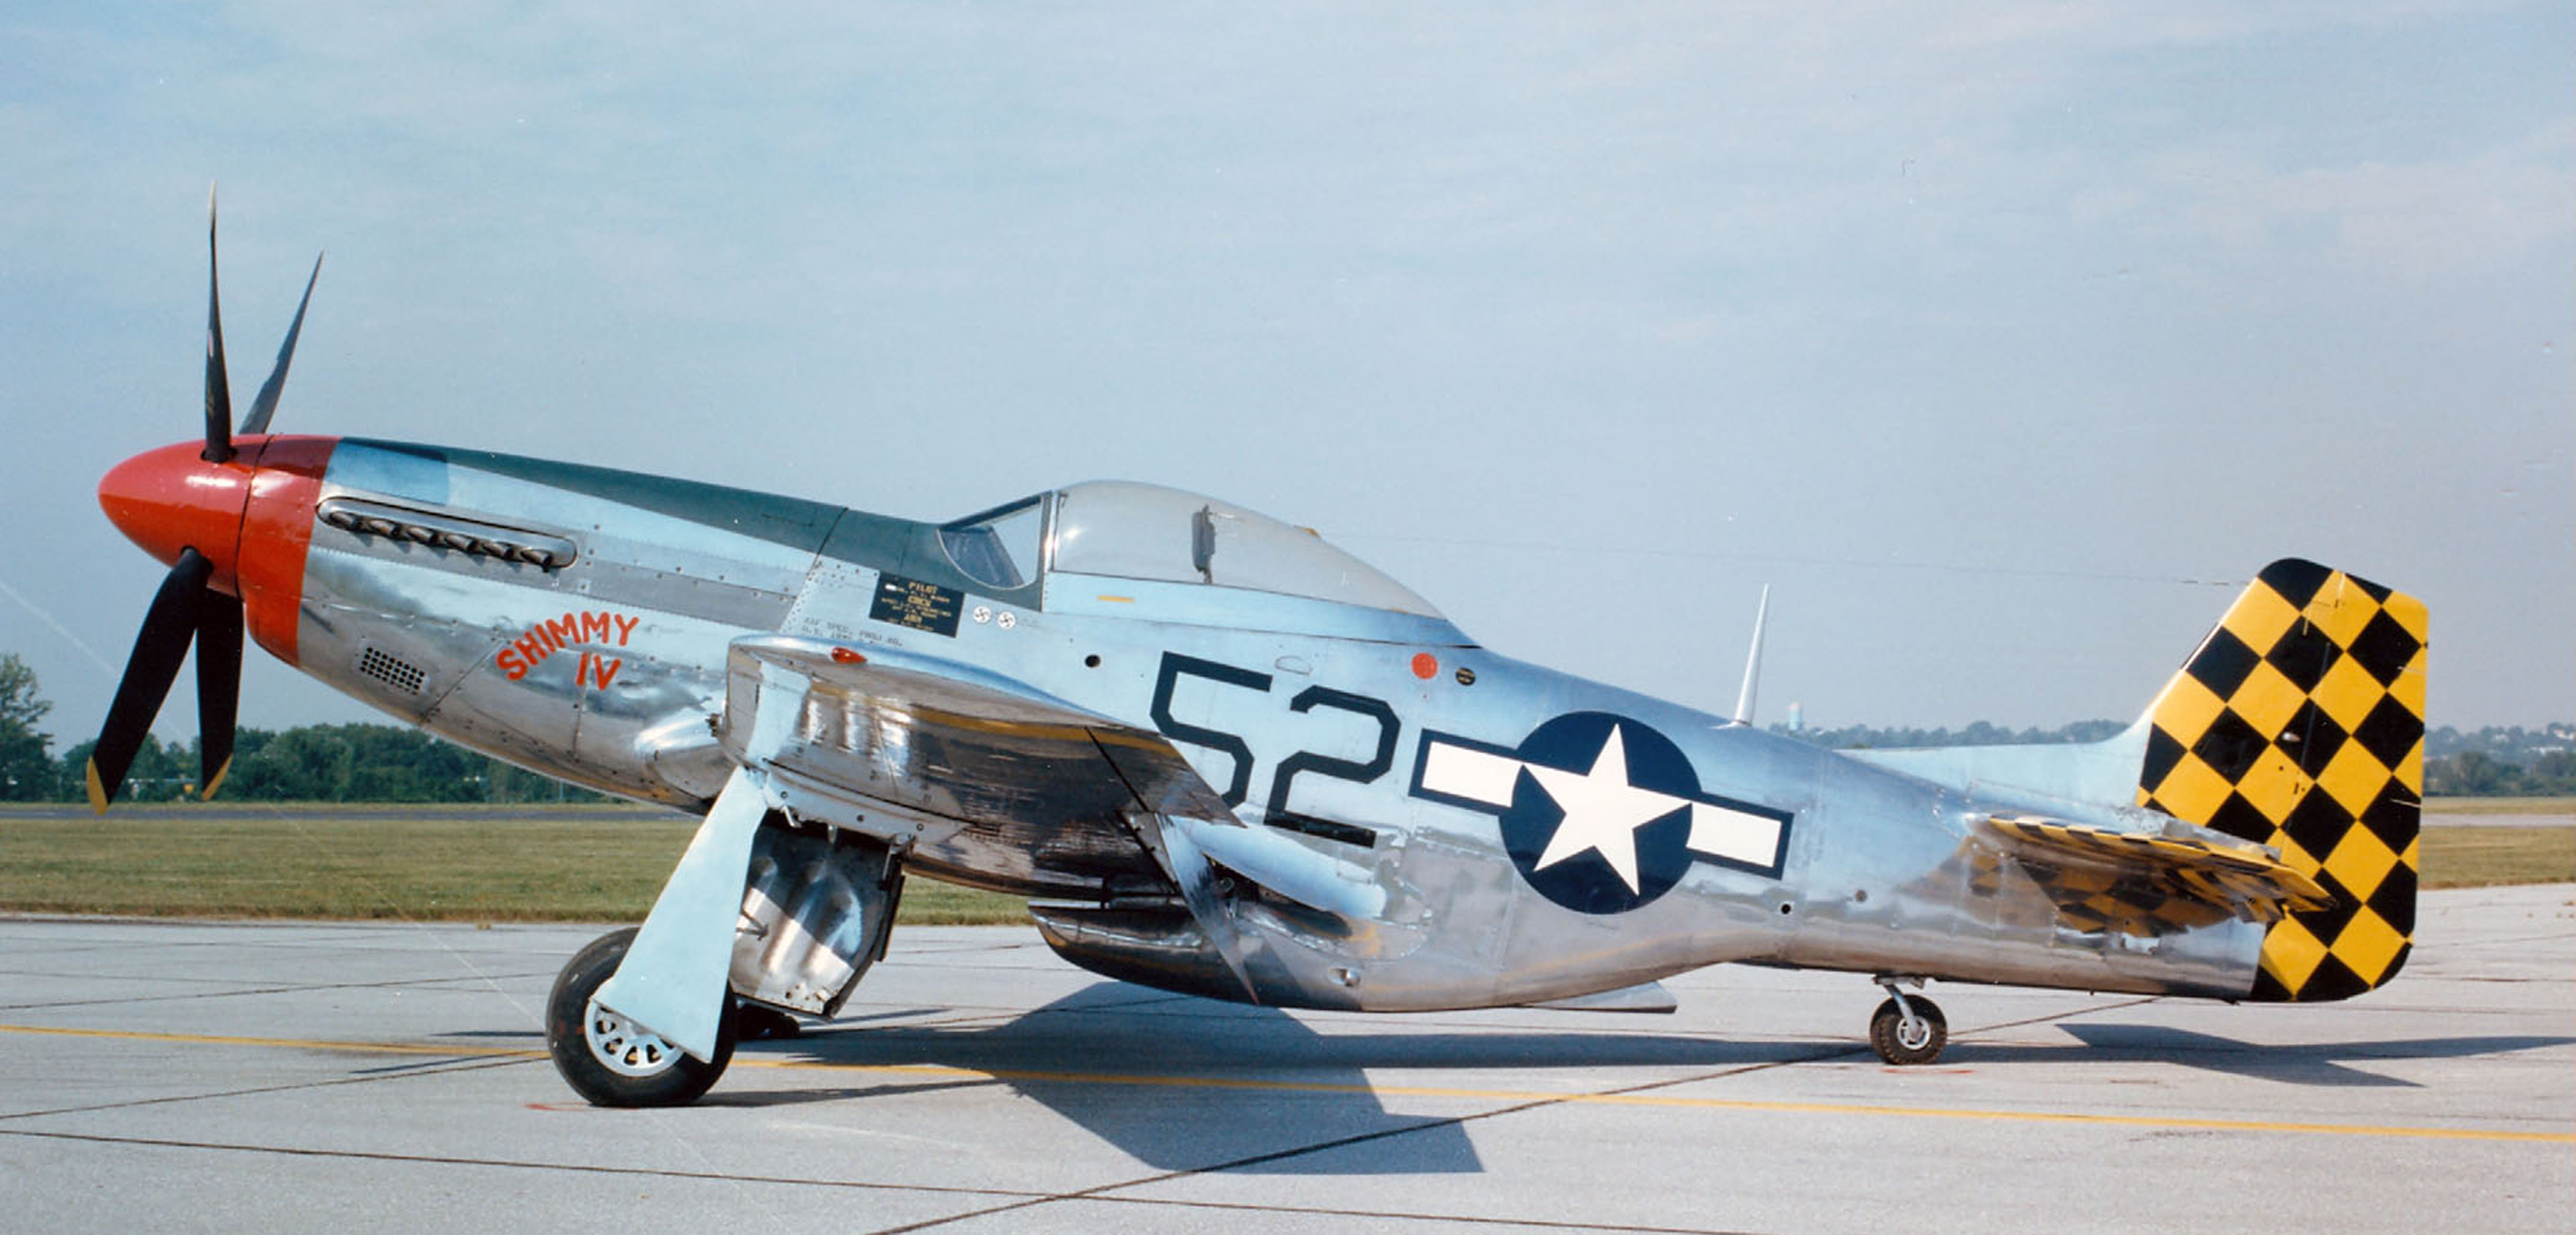 A North American P-51D Mustang at the National Museum of the United States Air Force in Dayton